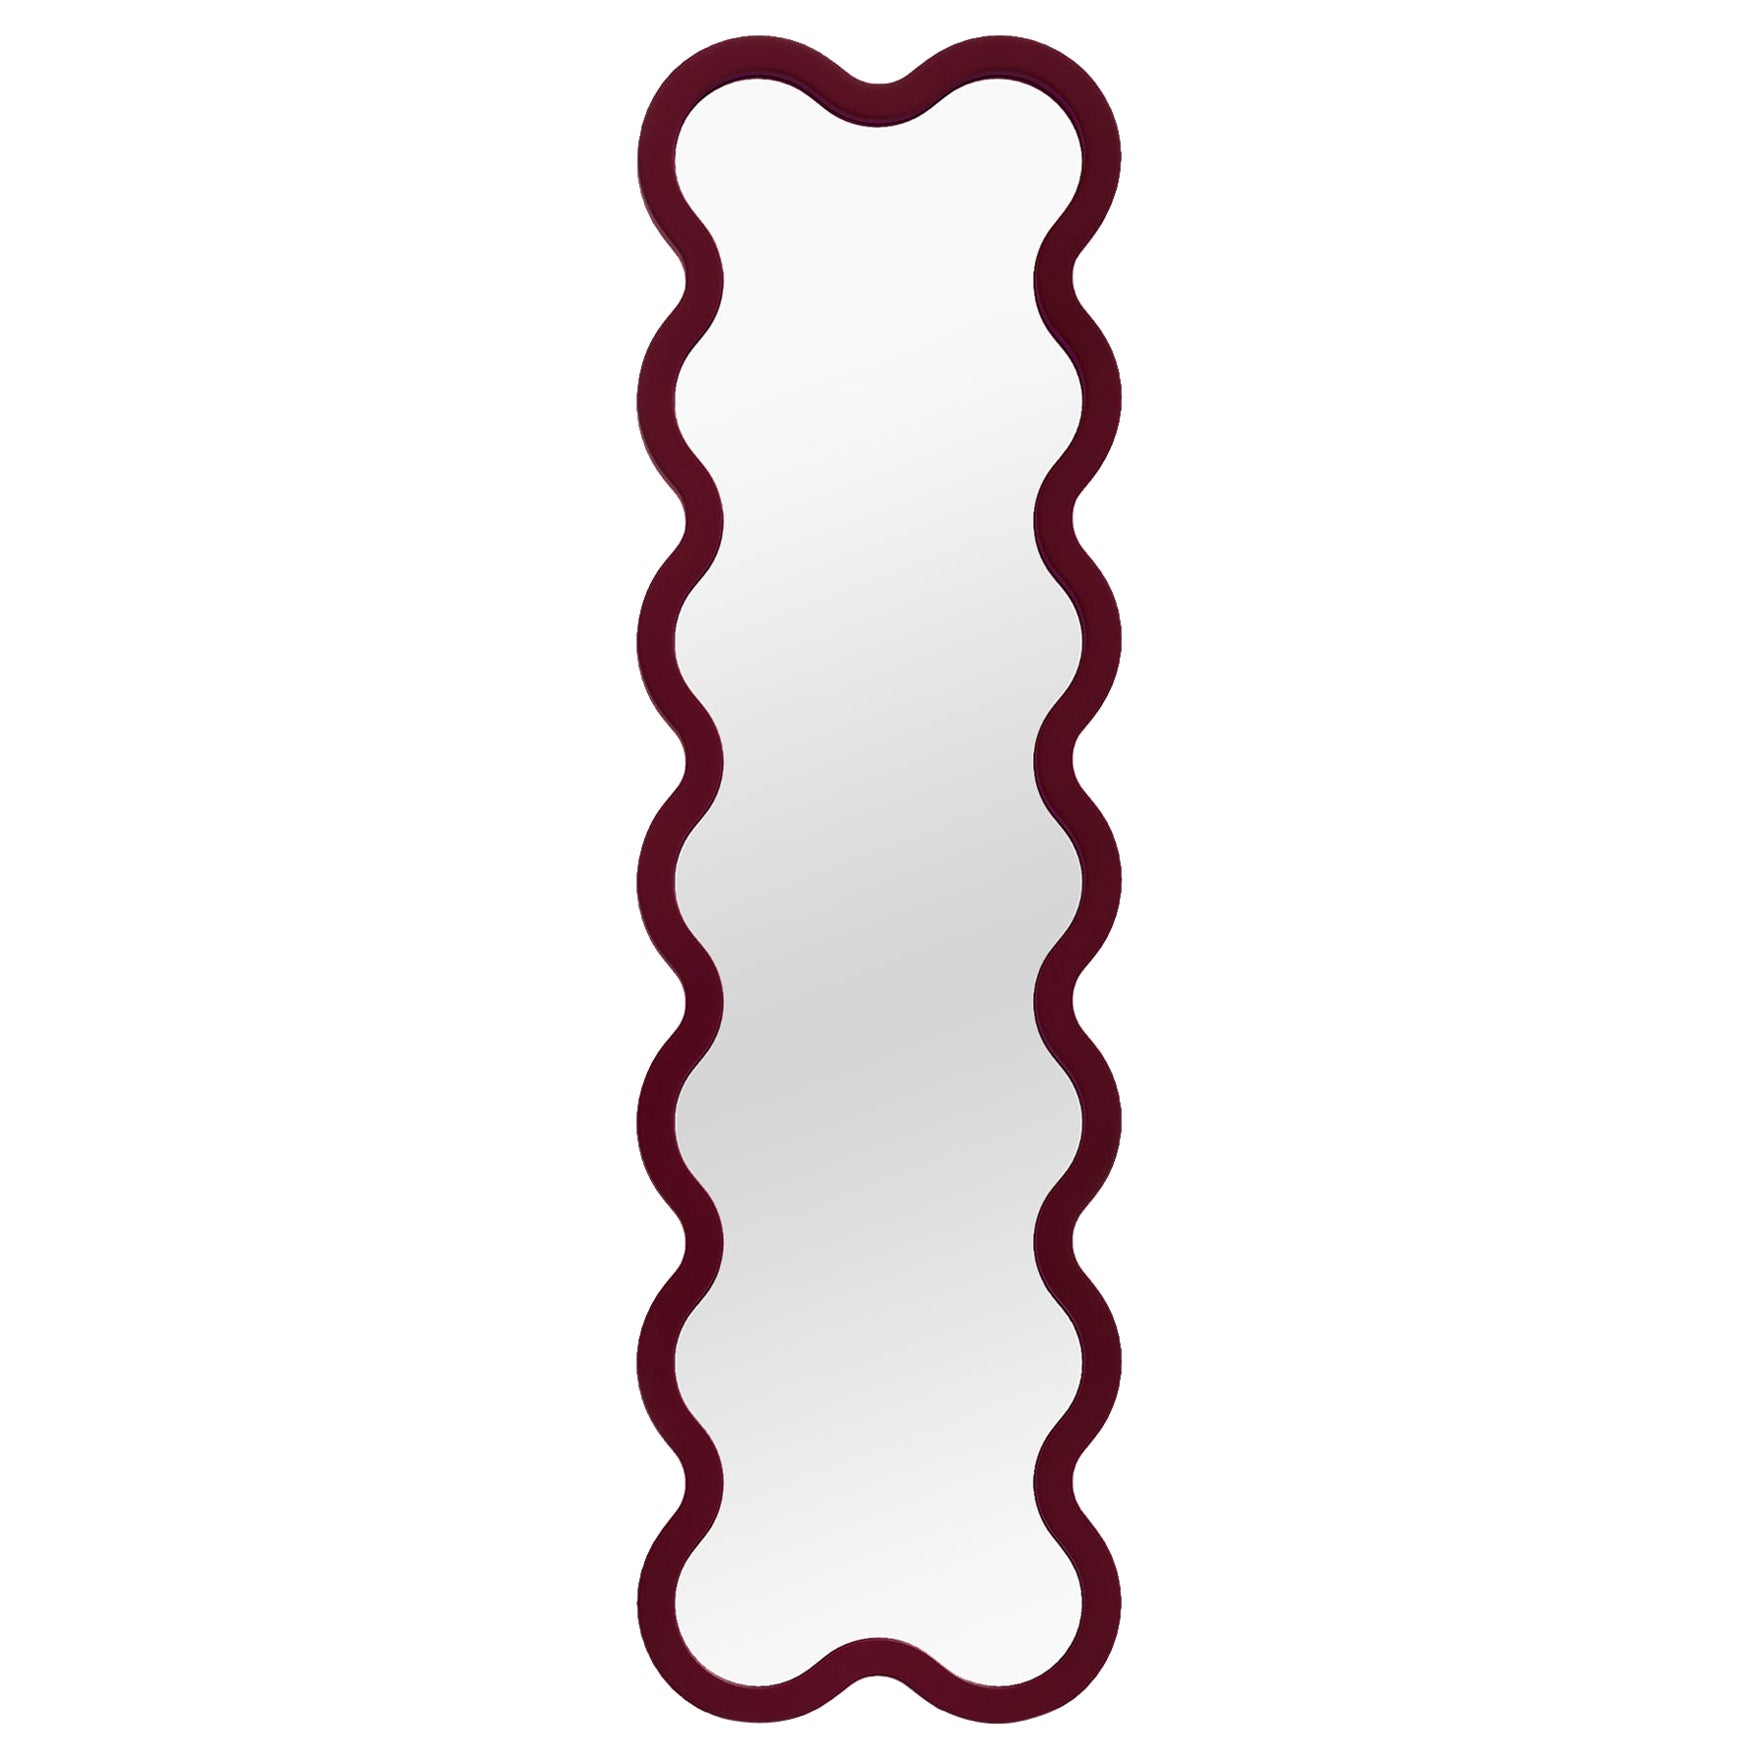 Contemporary Mirror 'Hvyli 14' by Oitoproducts, Dark Red Frame For Sale